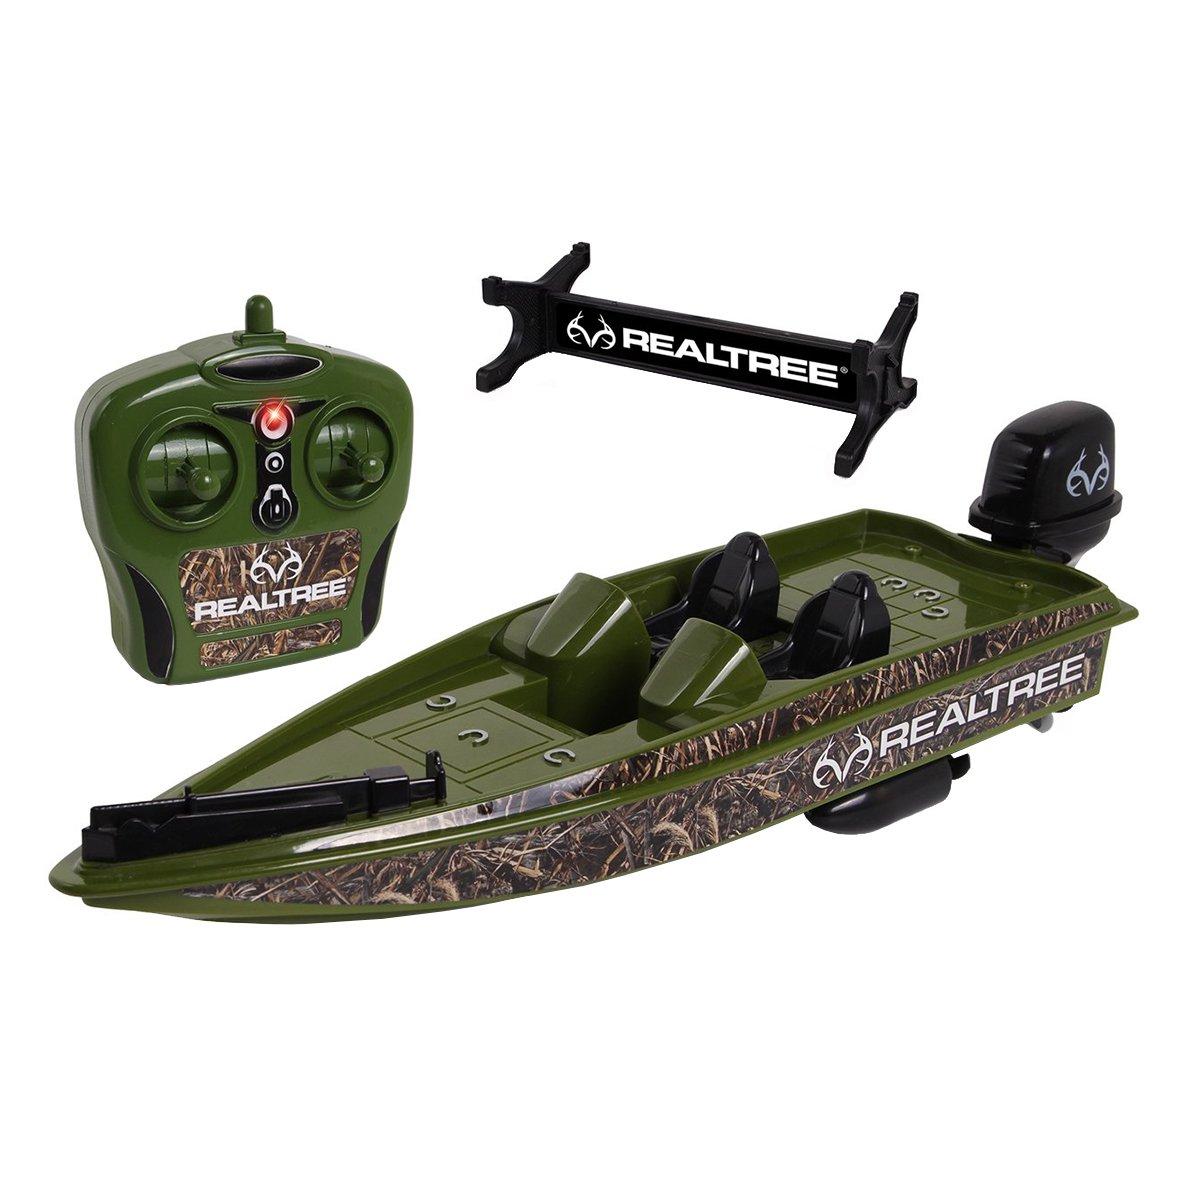 Realtree RC Full Function Bass Boat